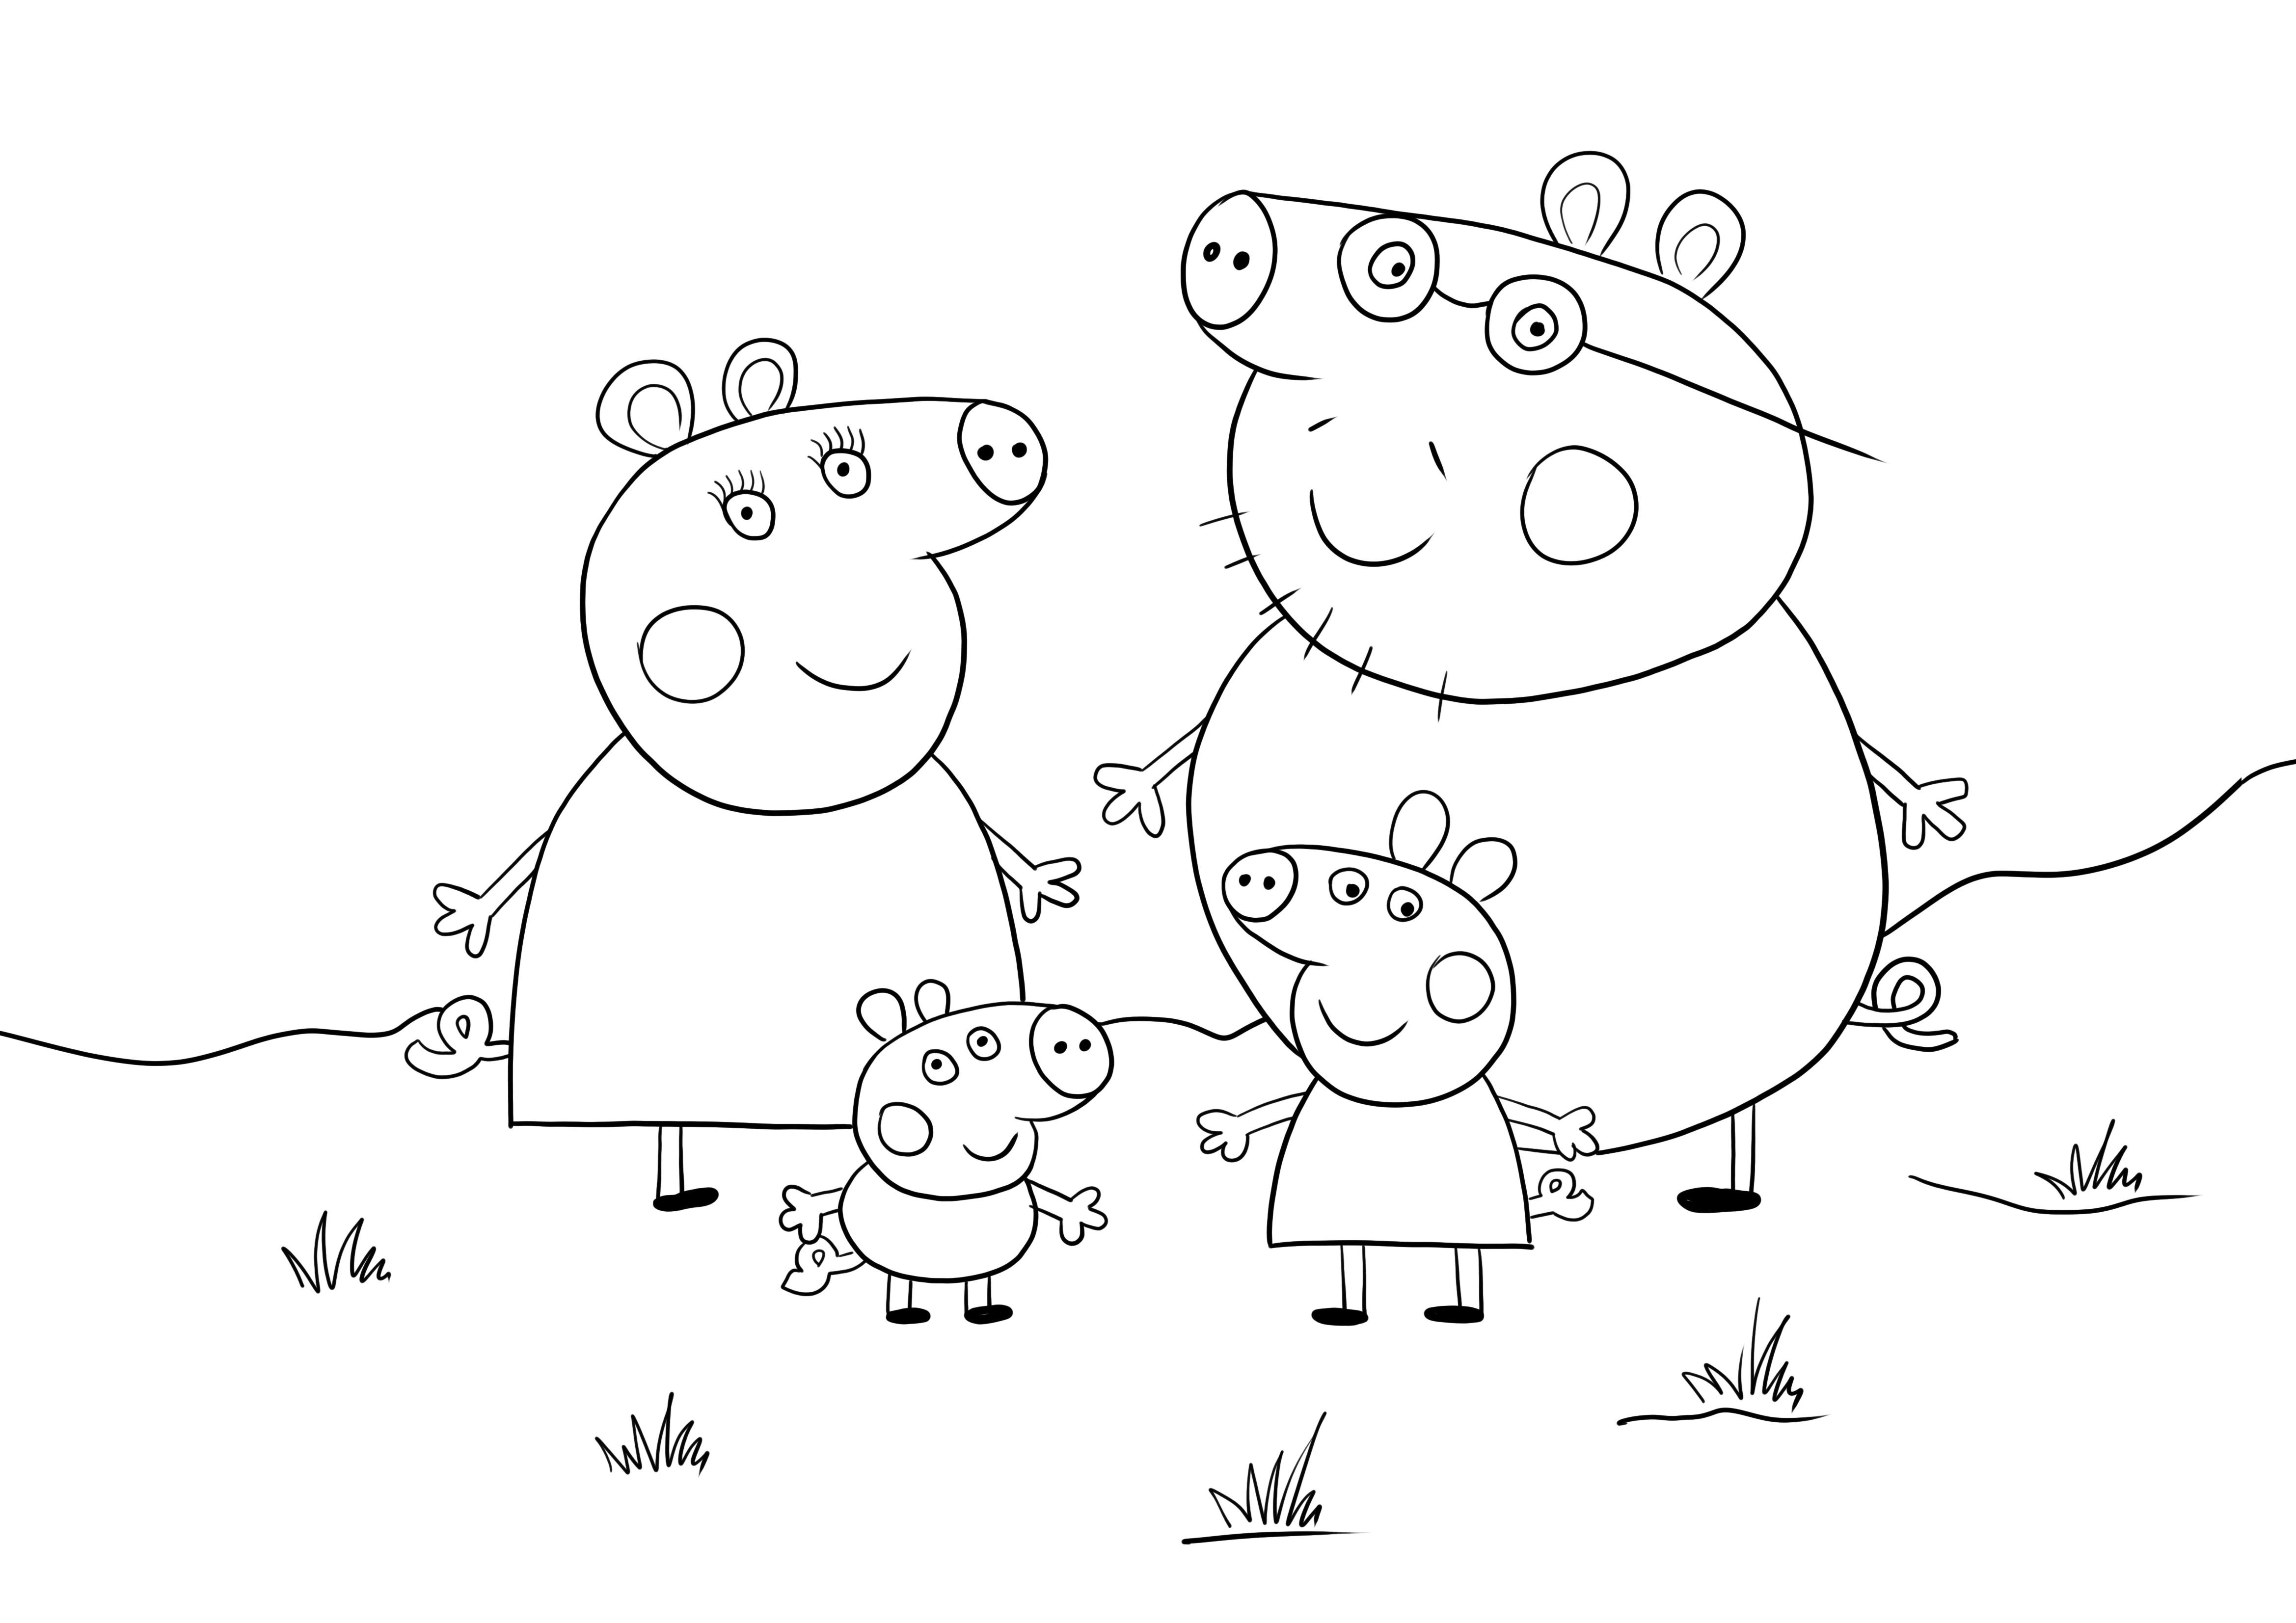 Peppa Pig family free printable for easy coloring image